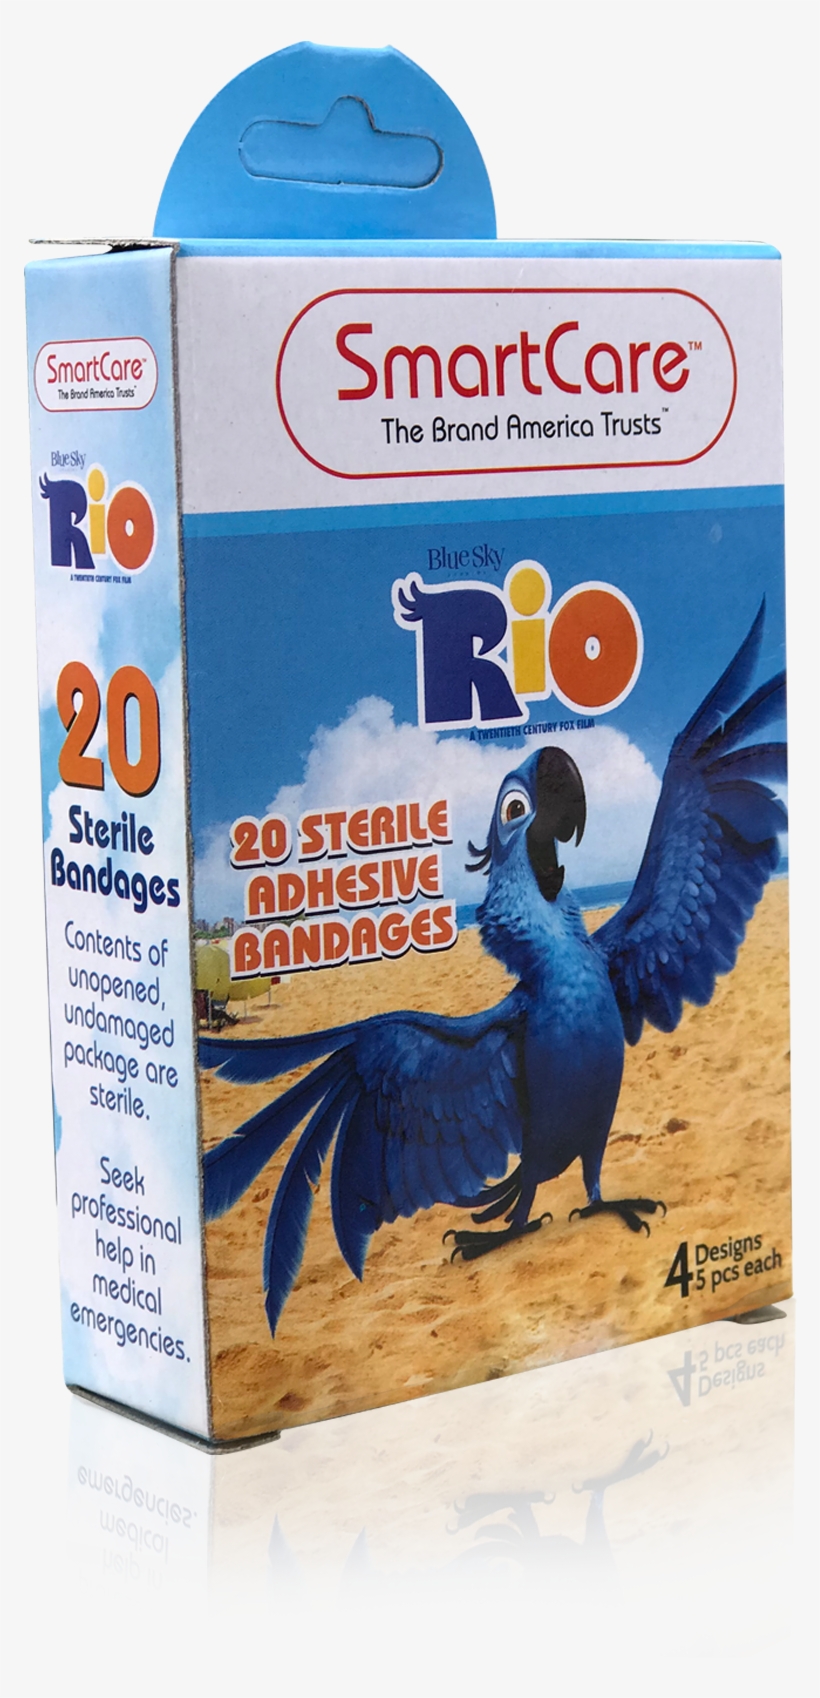 Load Image Into Gallery Viewer, Smart Care Rio Bandages - Rio, transparent png #9805171